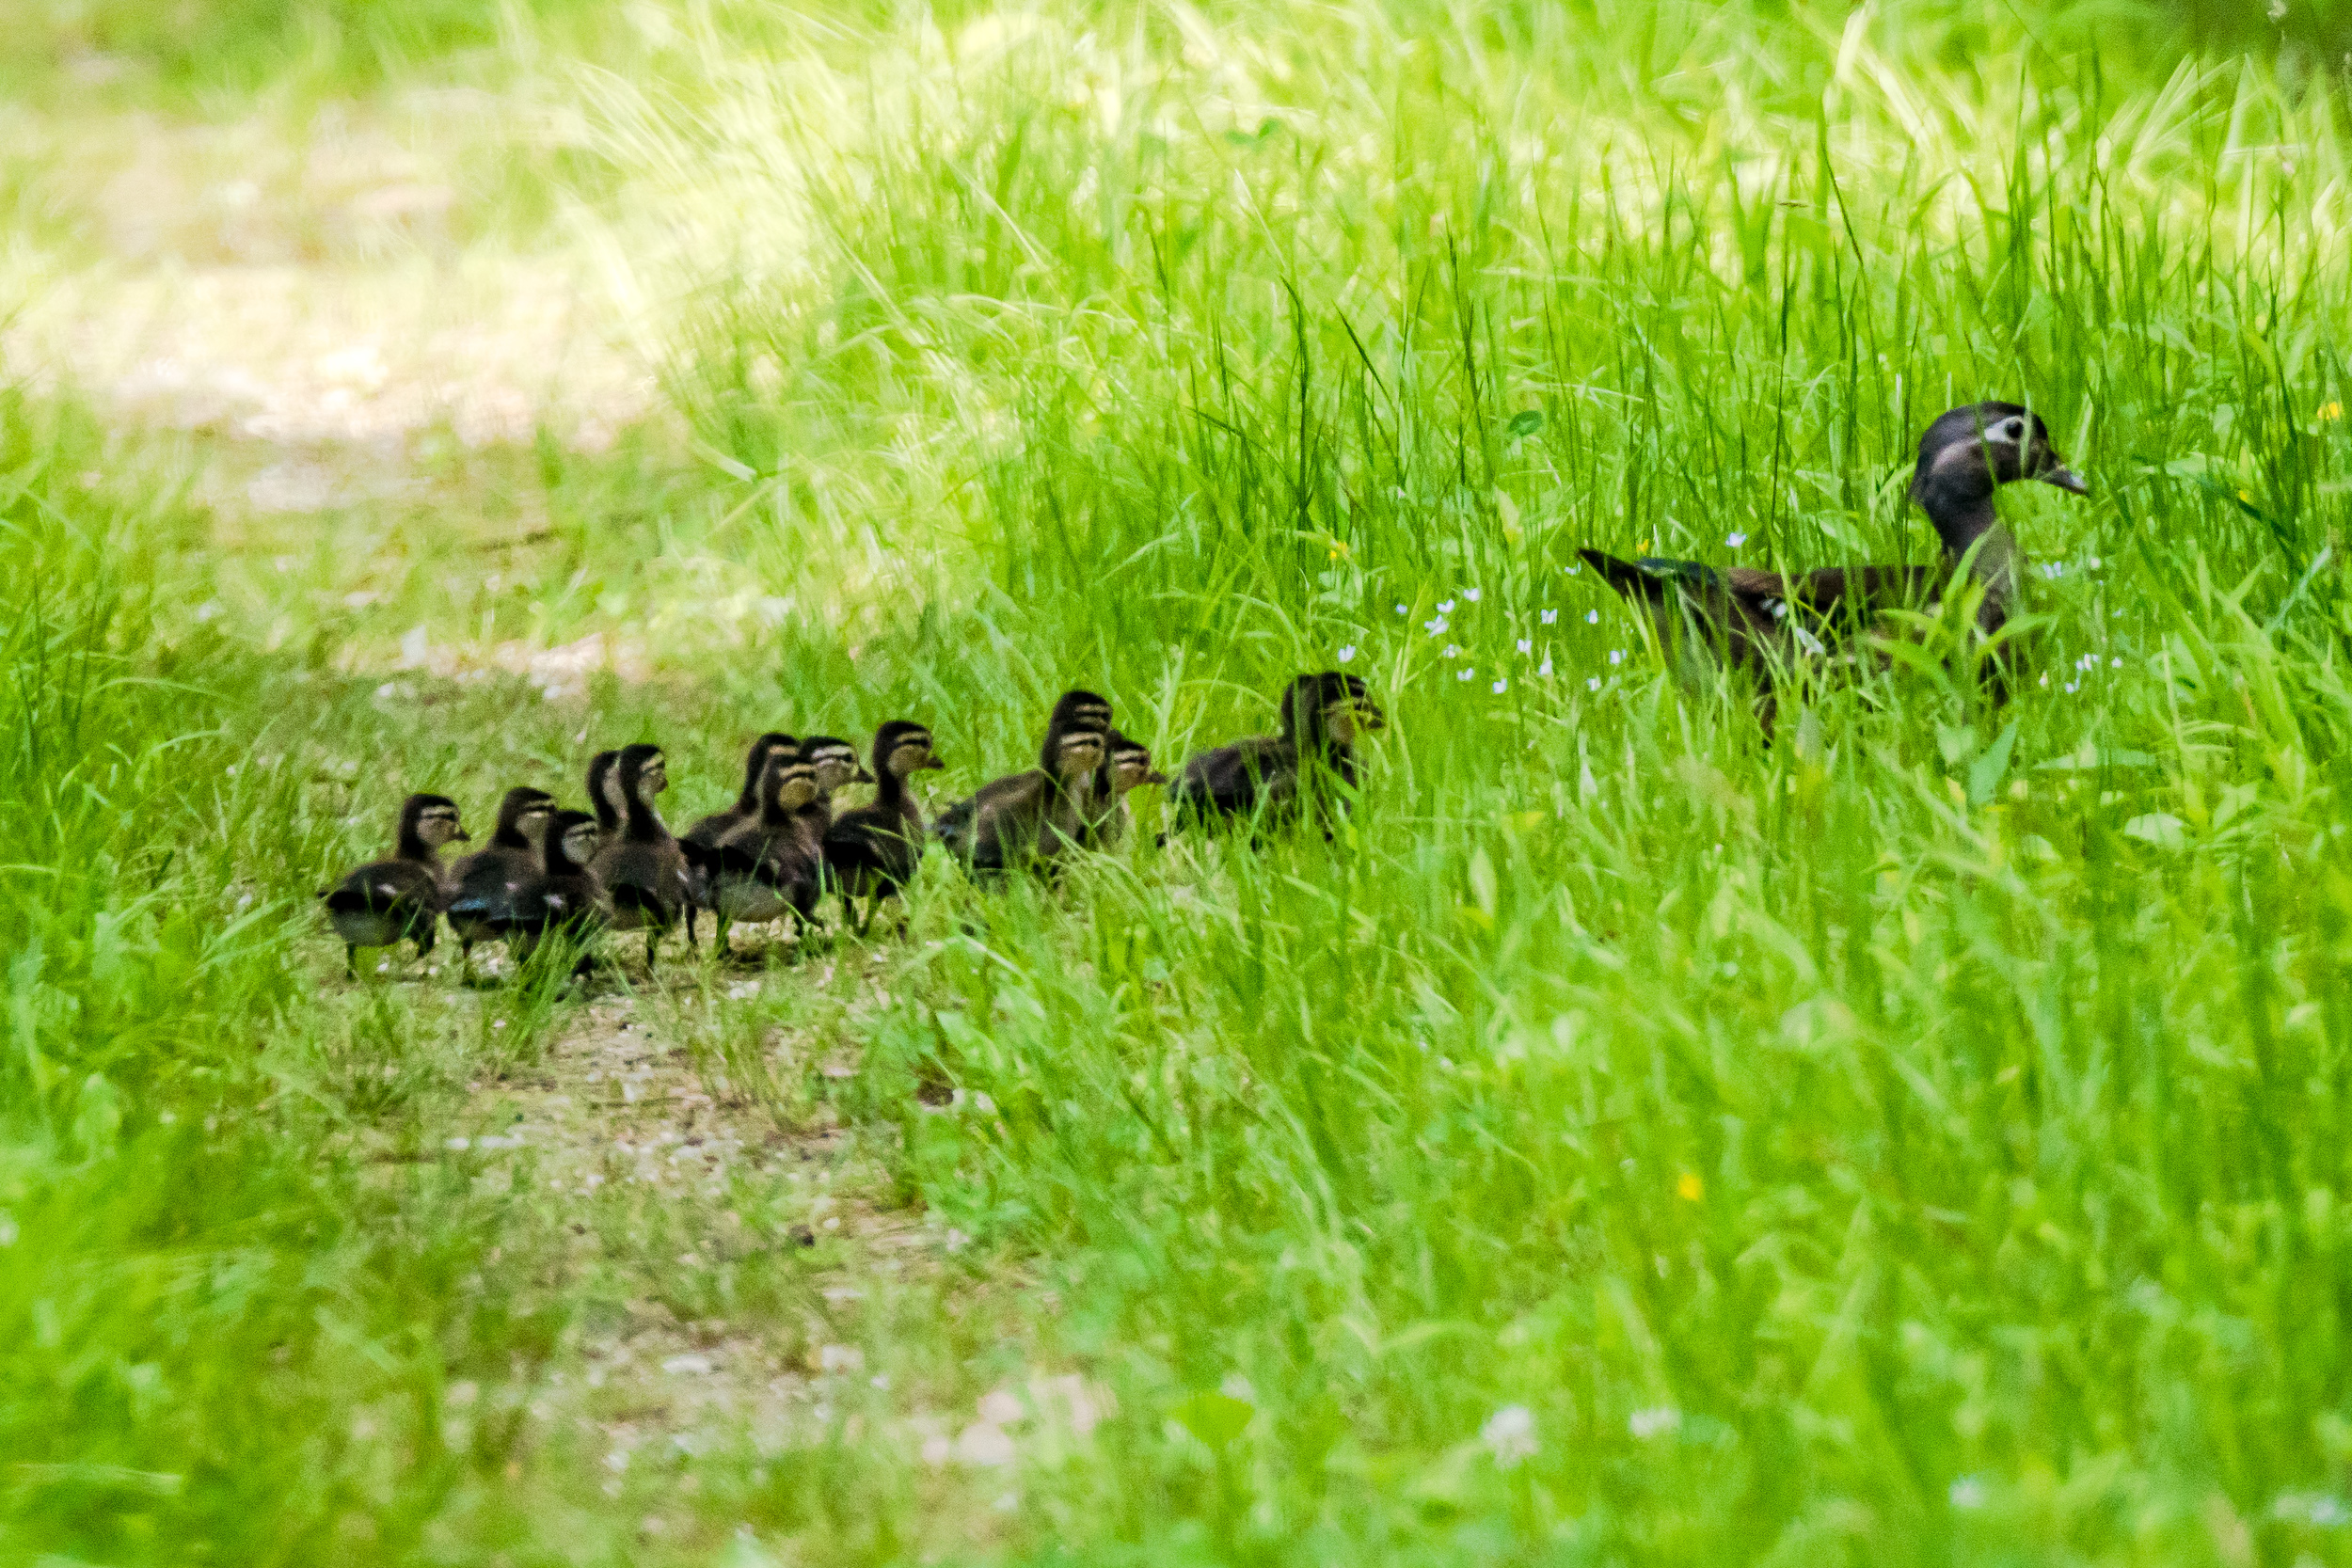   I got a neat surprise this morning..Out popped a female wood duck in the path in front of me. That was surprise enough, but then out popped 14 ducklings the size of ping pong balls right behind her. Ill bet they weren't but 24 to 36 hours old ... &